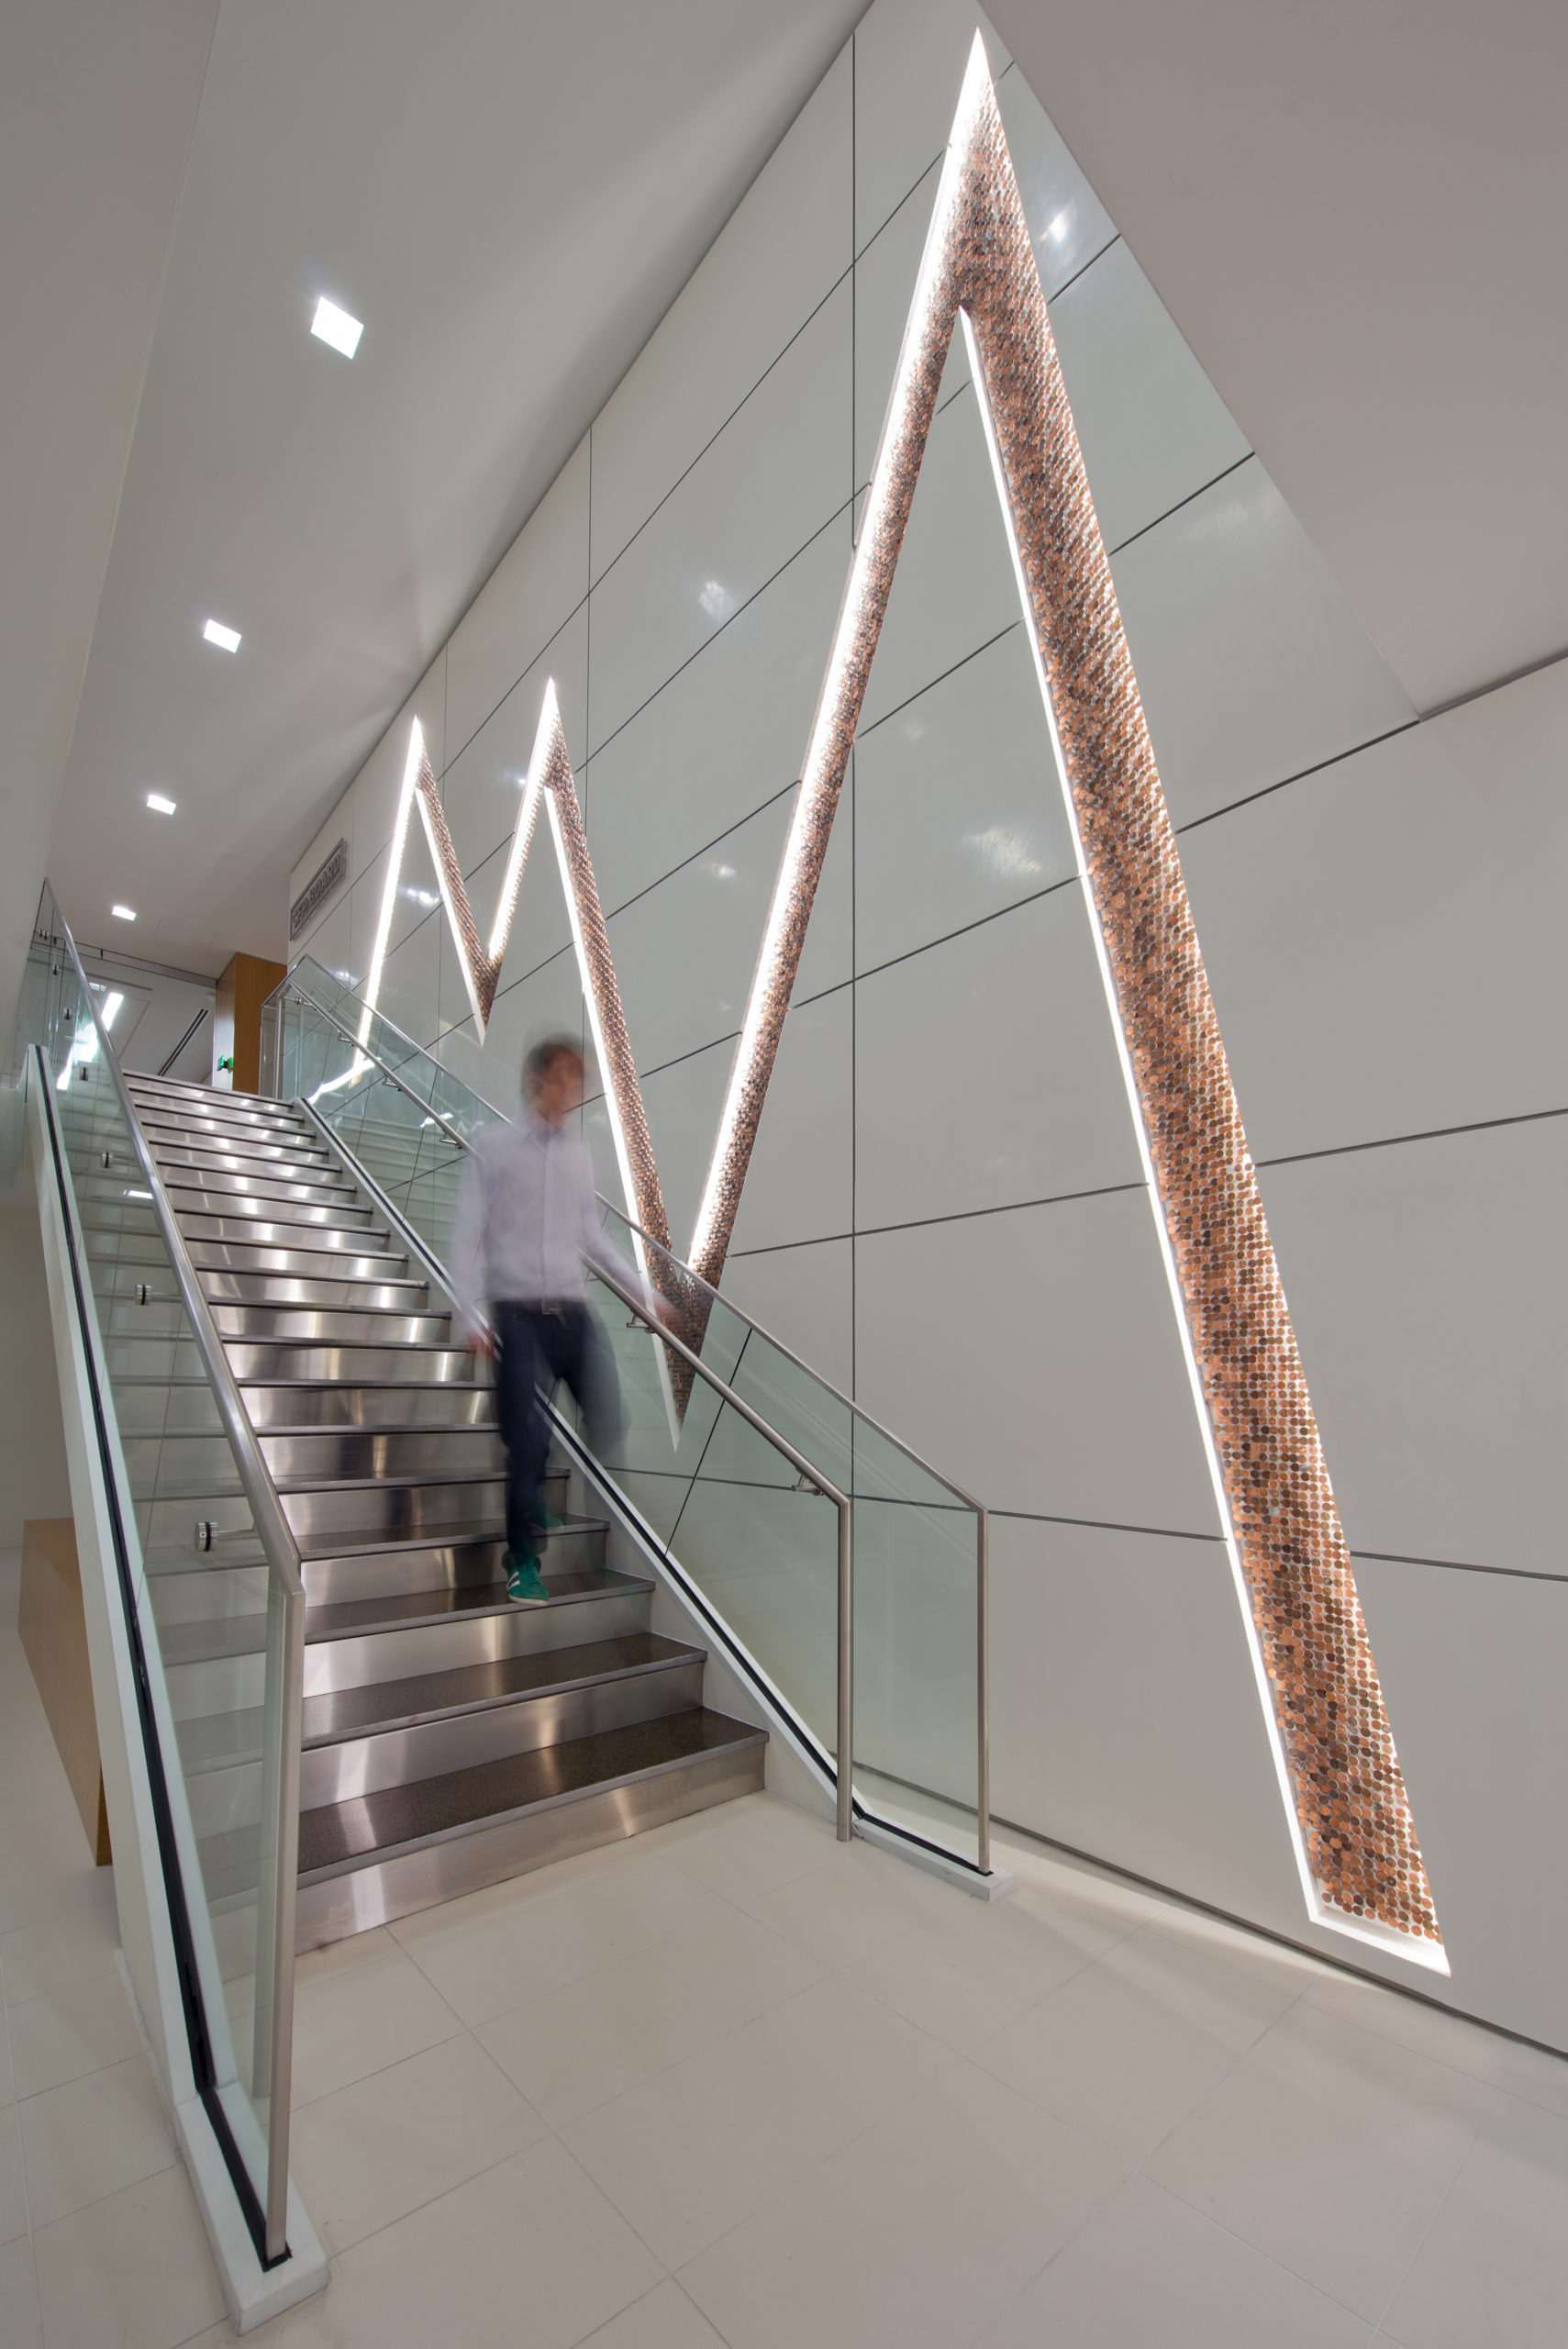 CFP Board - Connecting Stair